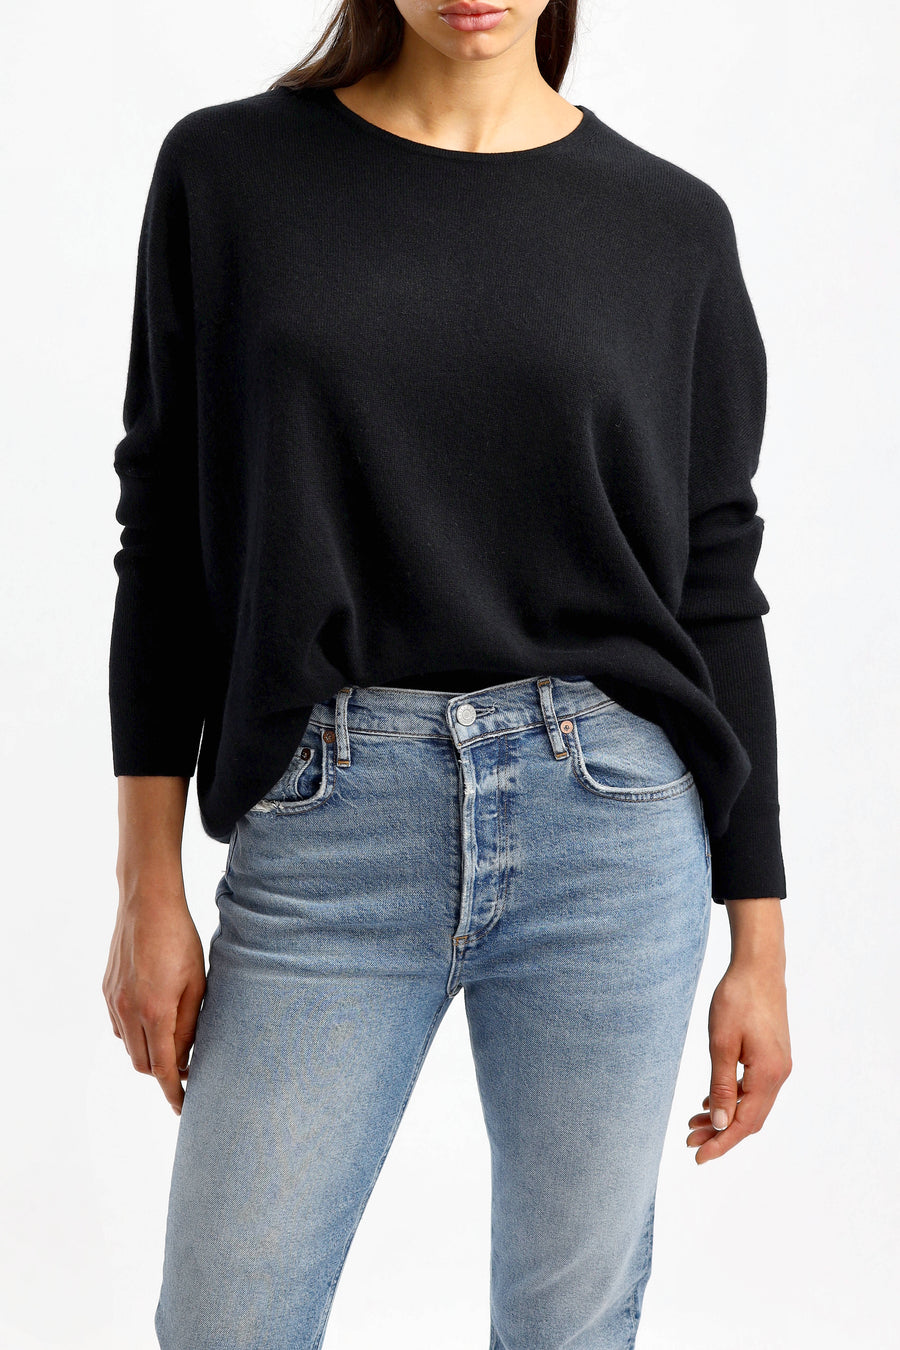 Pullover Oversized in SchwarzAllude - Anita Hass